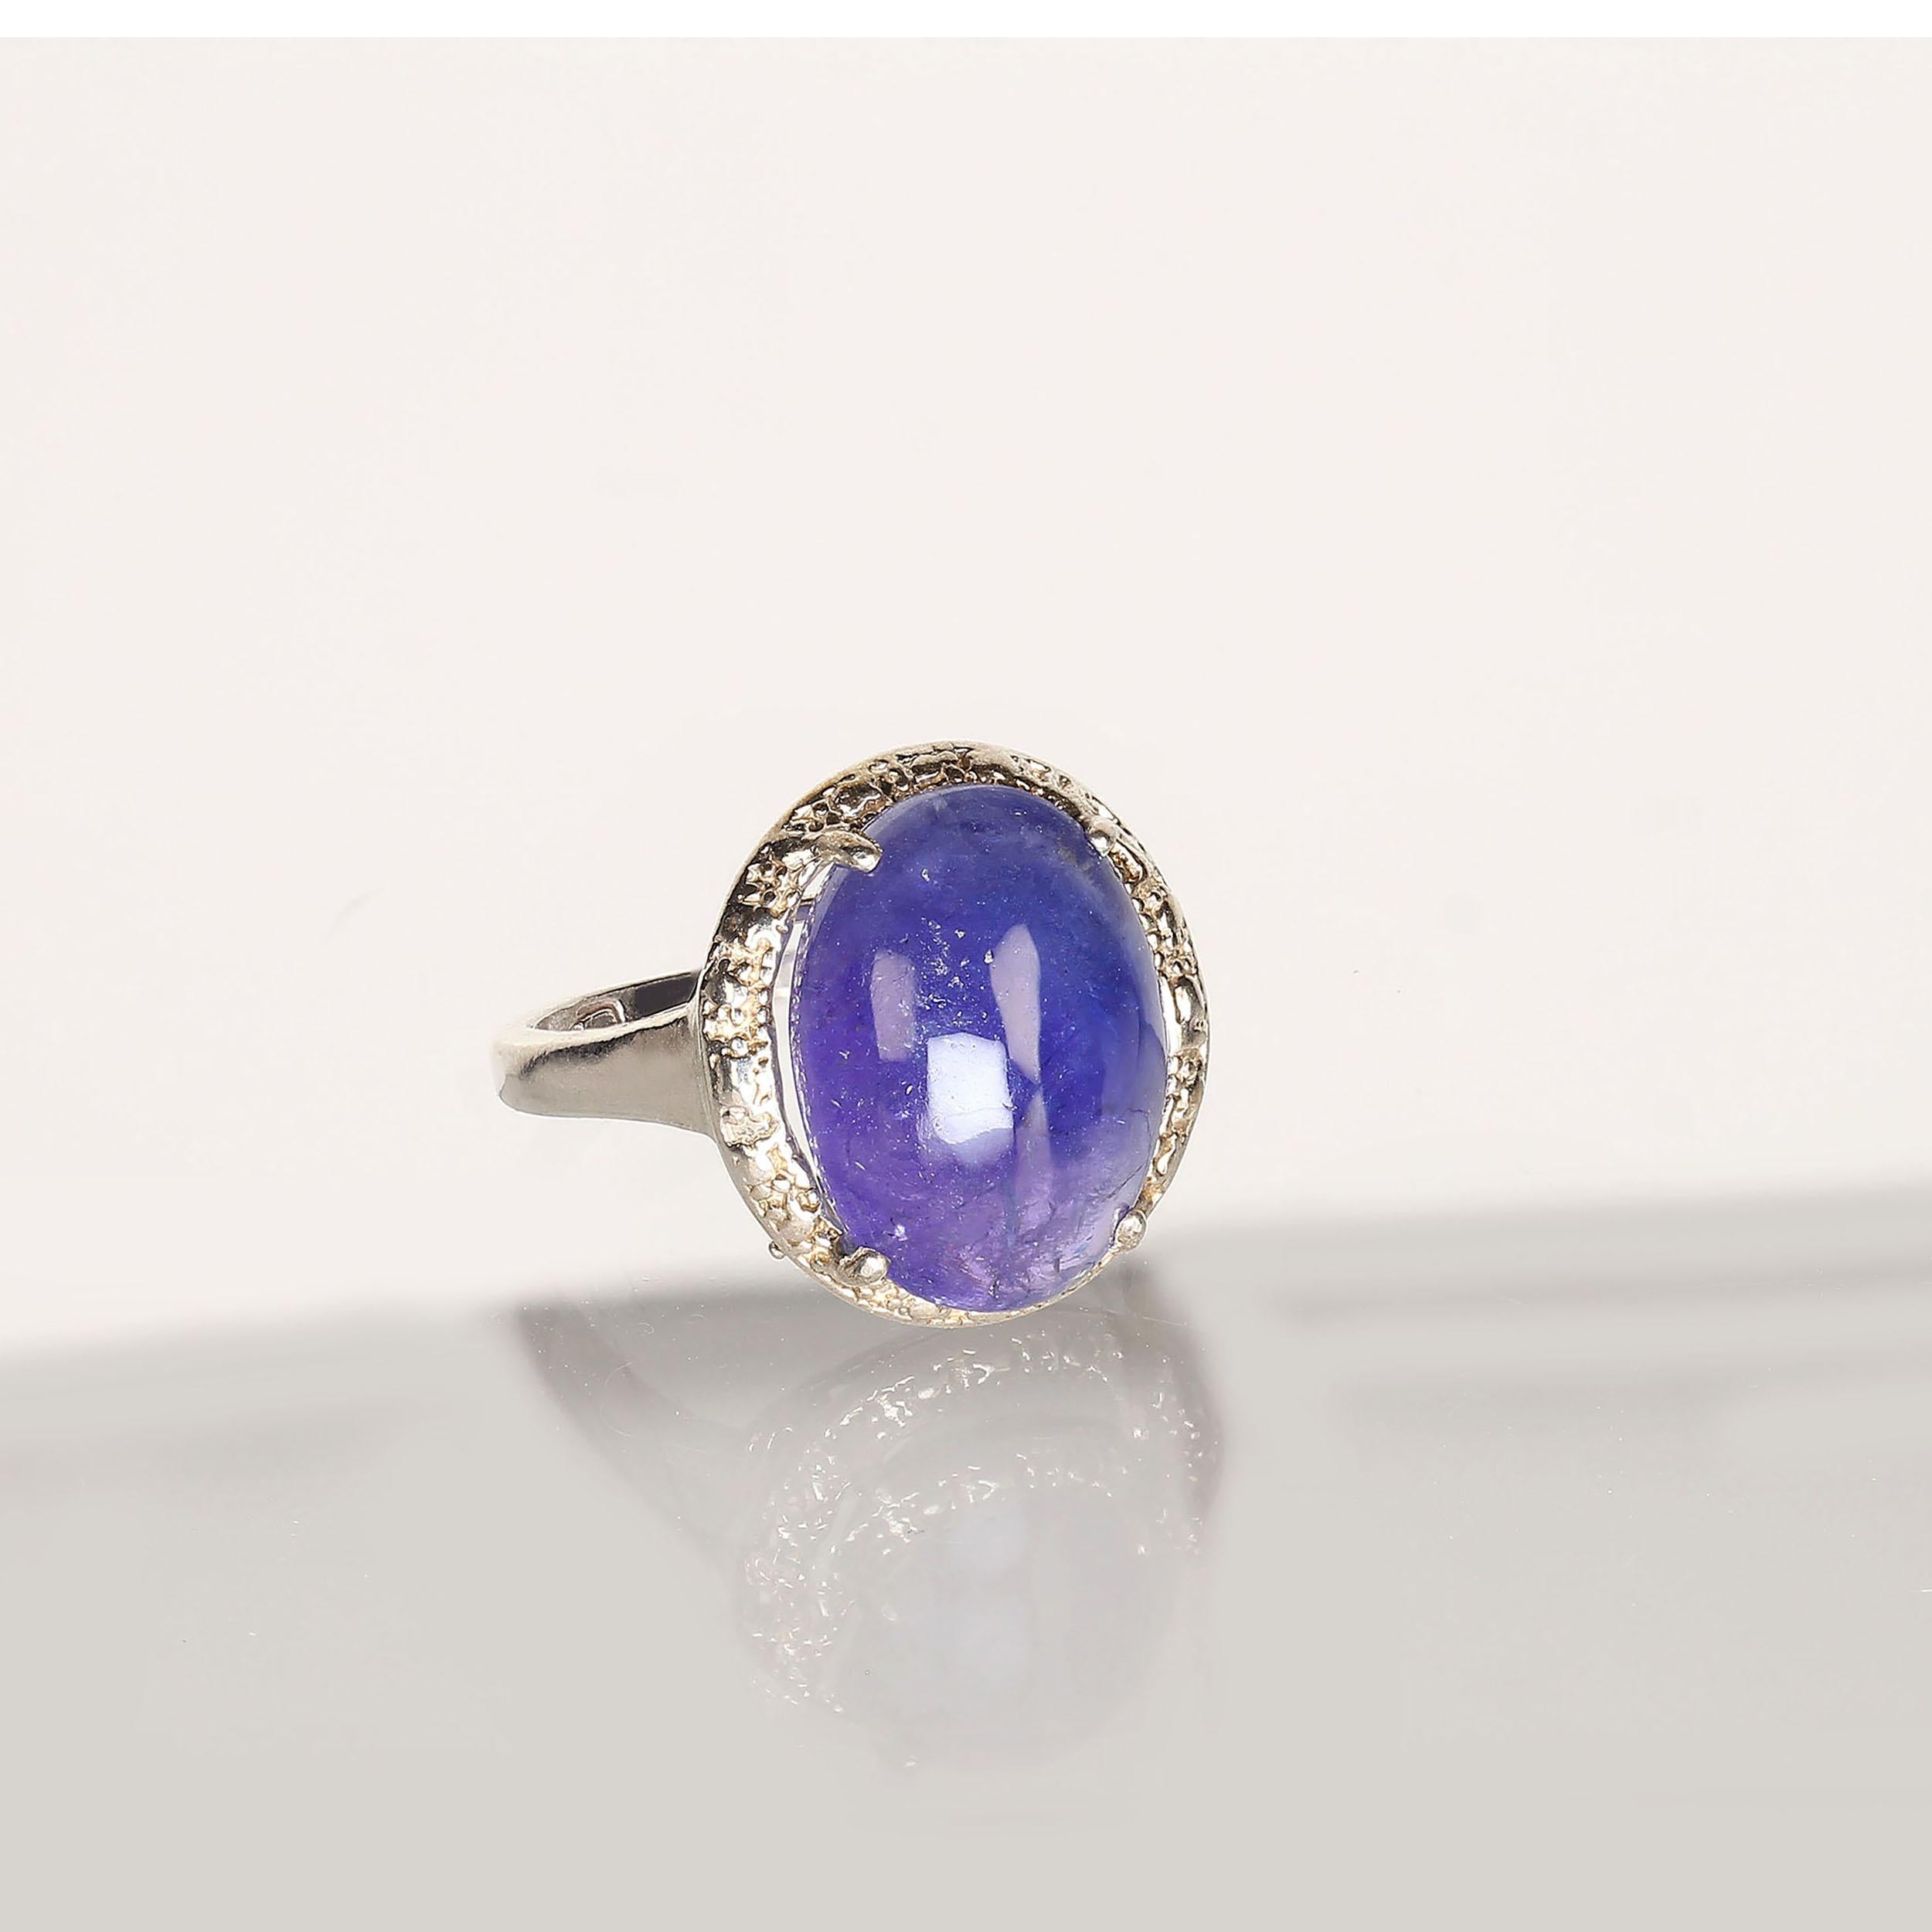 Artisan AJD Gorgeous Oval Tanzanite Cabochon in Sterling Silver Ring